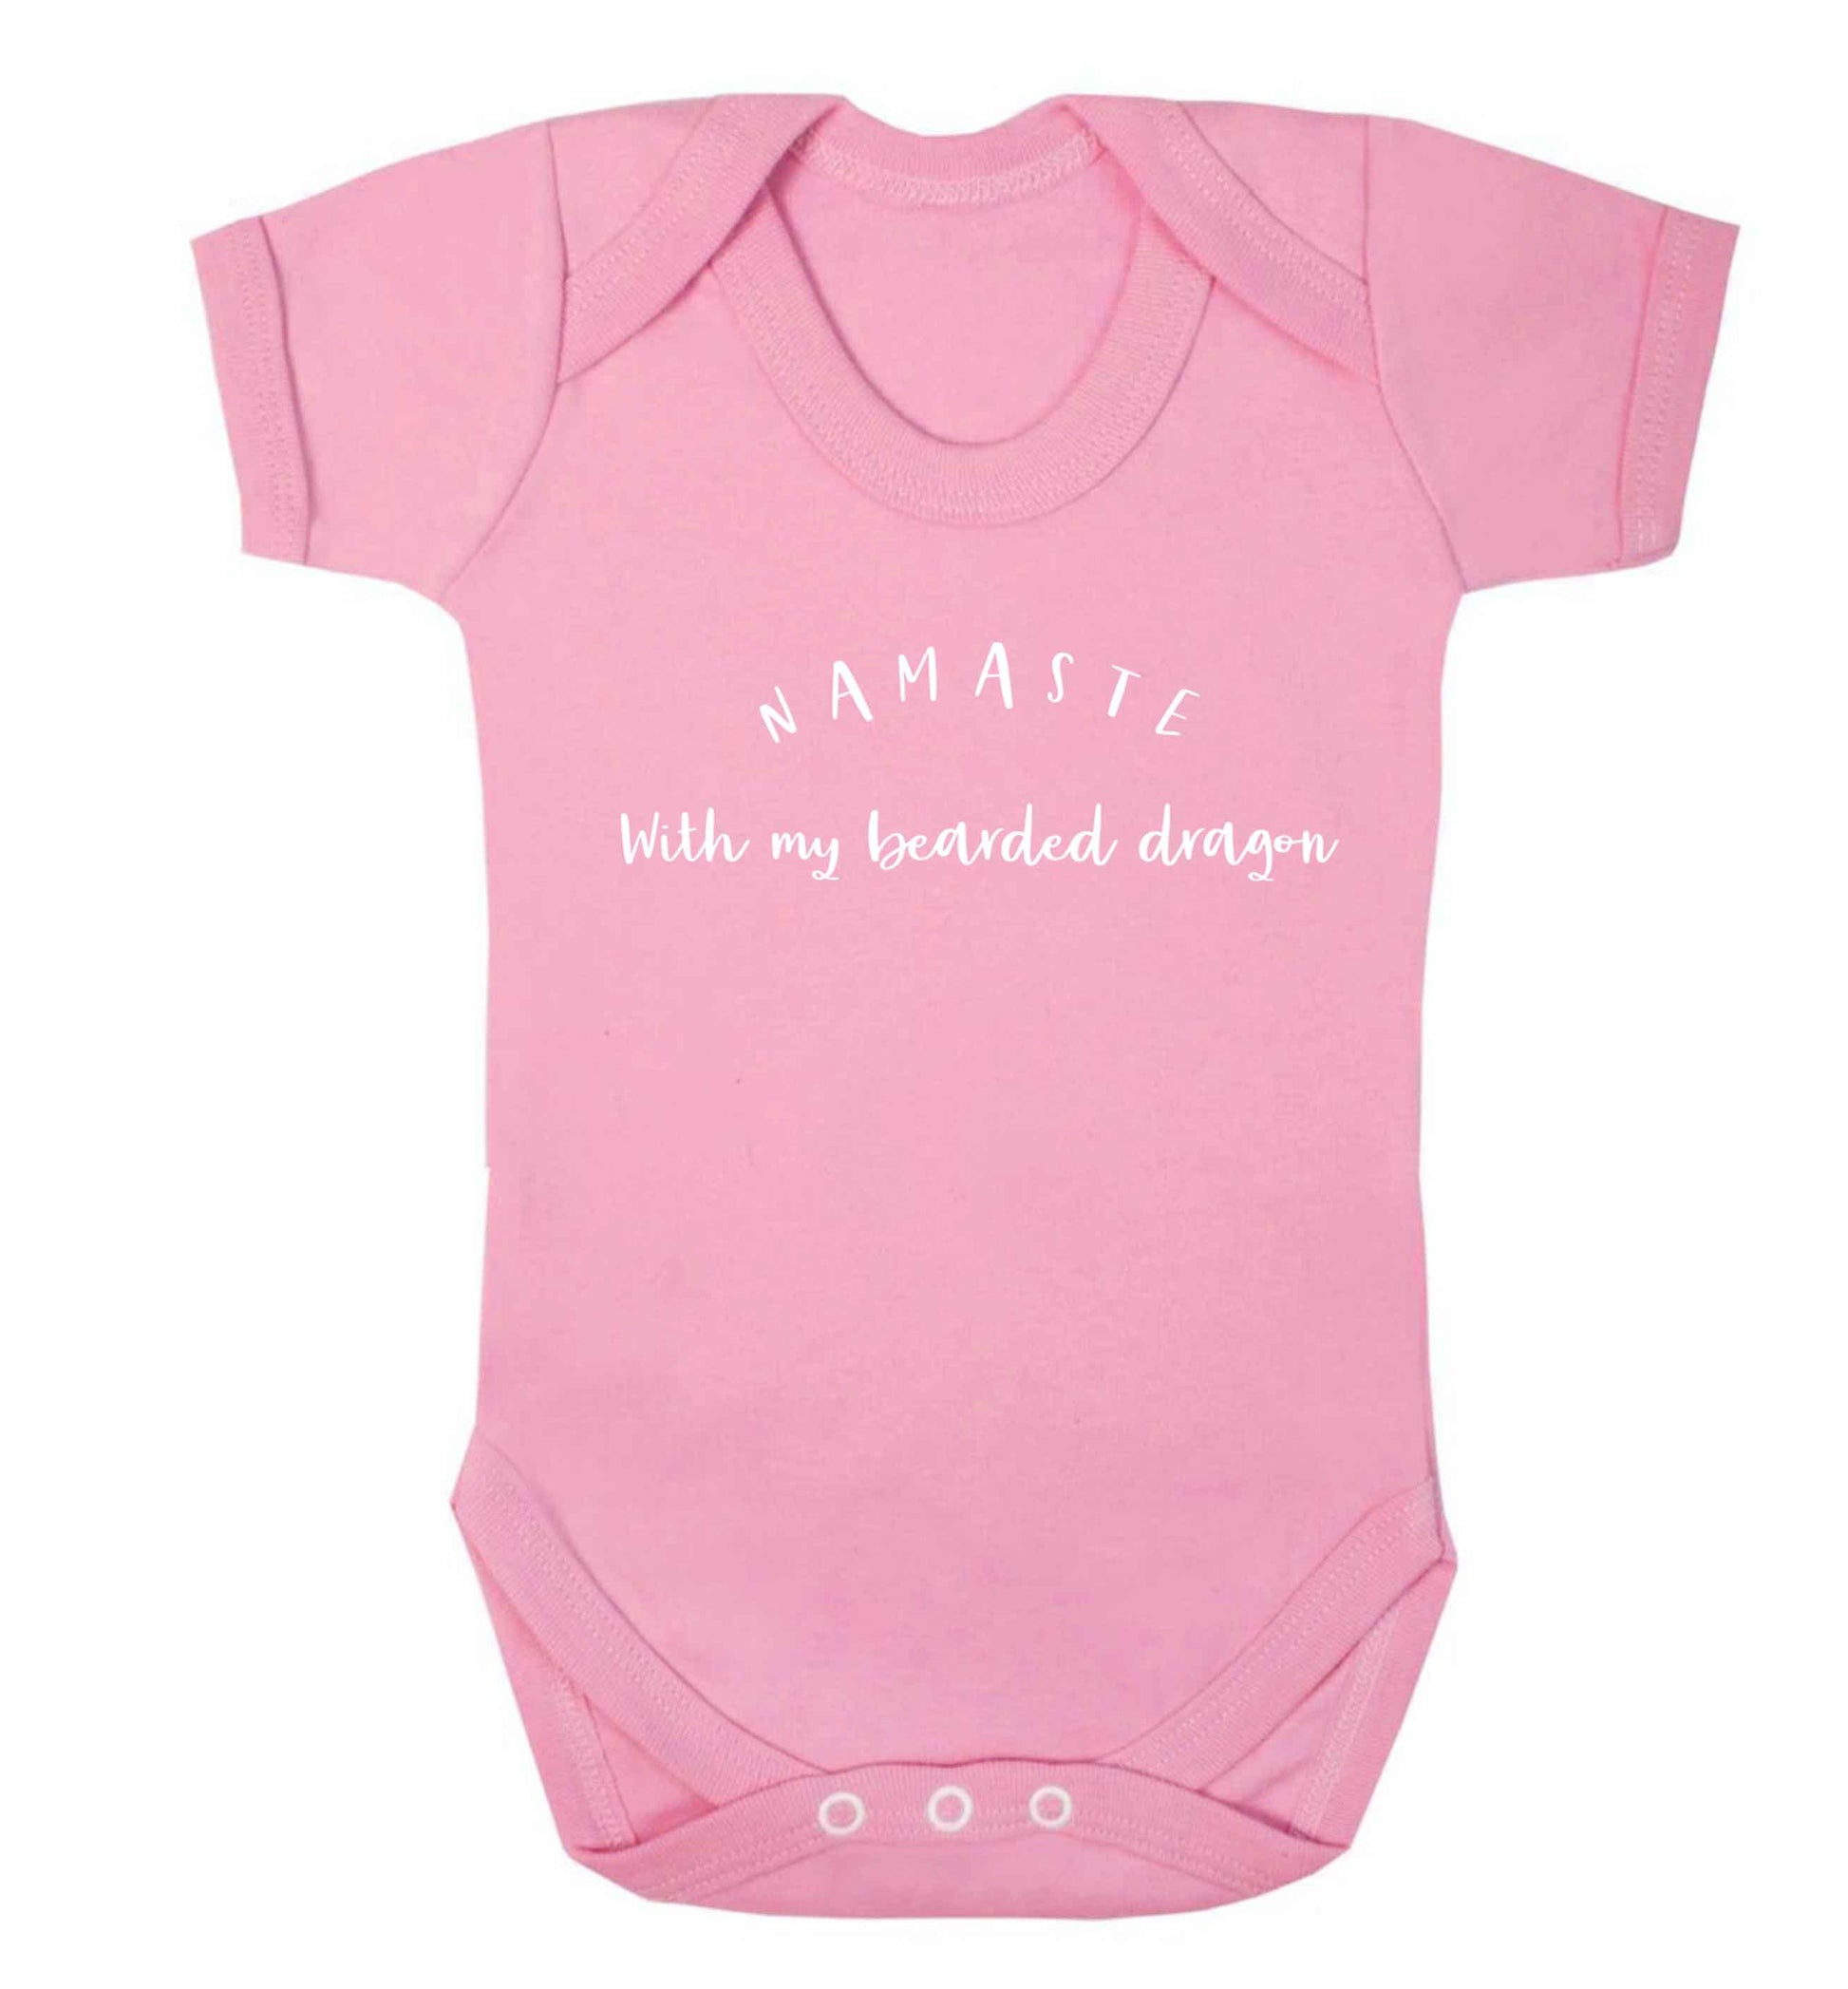 Namaste with my bearded dragon Baby Vest pale pink 18-24 months